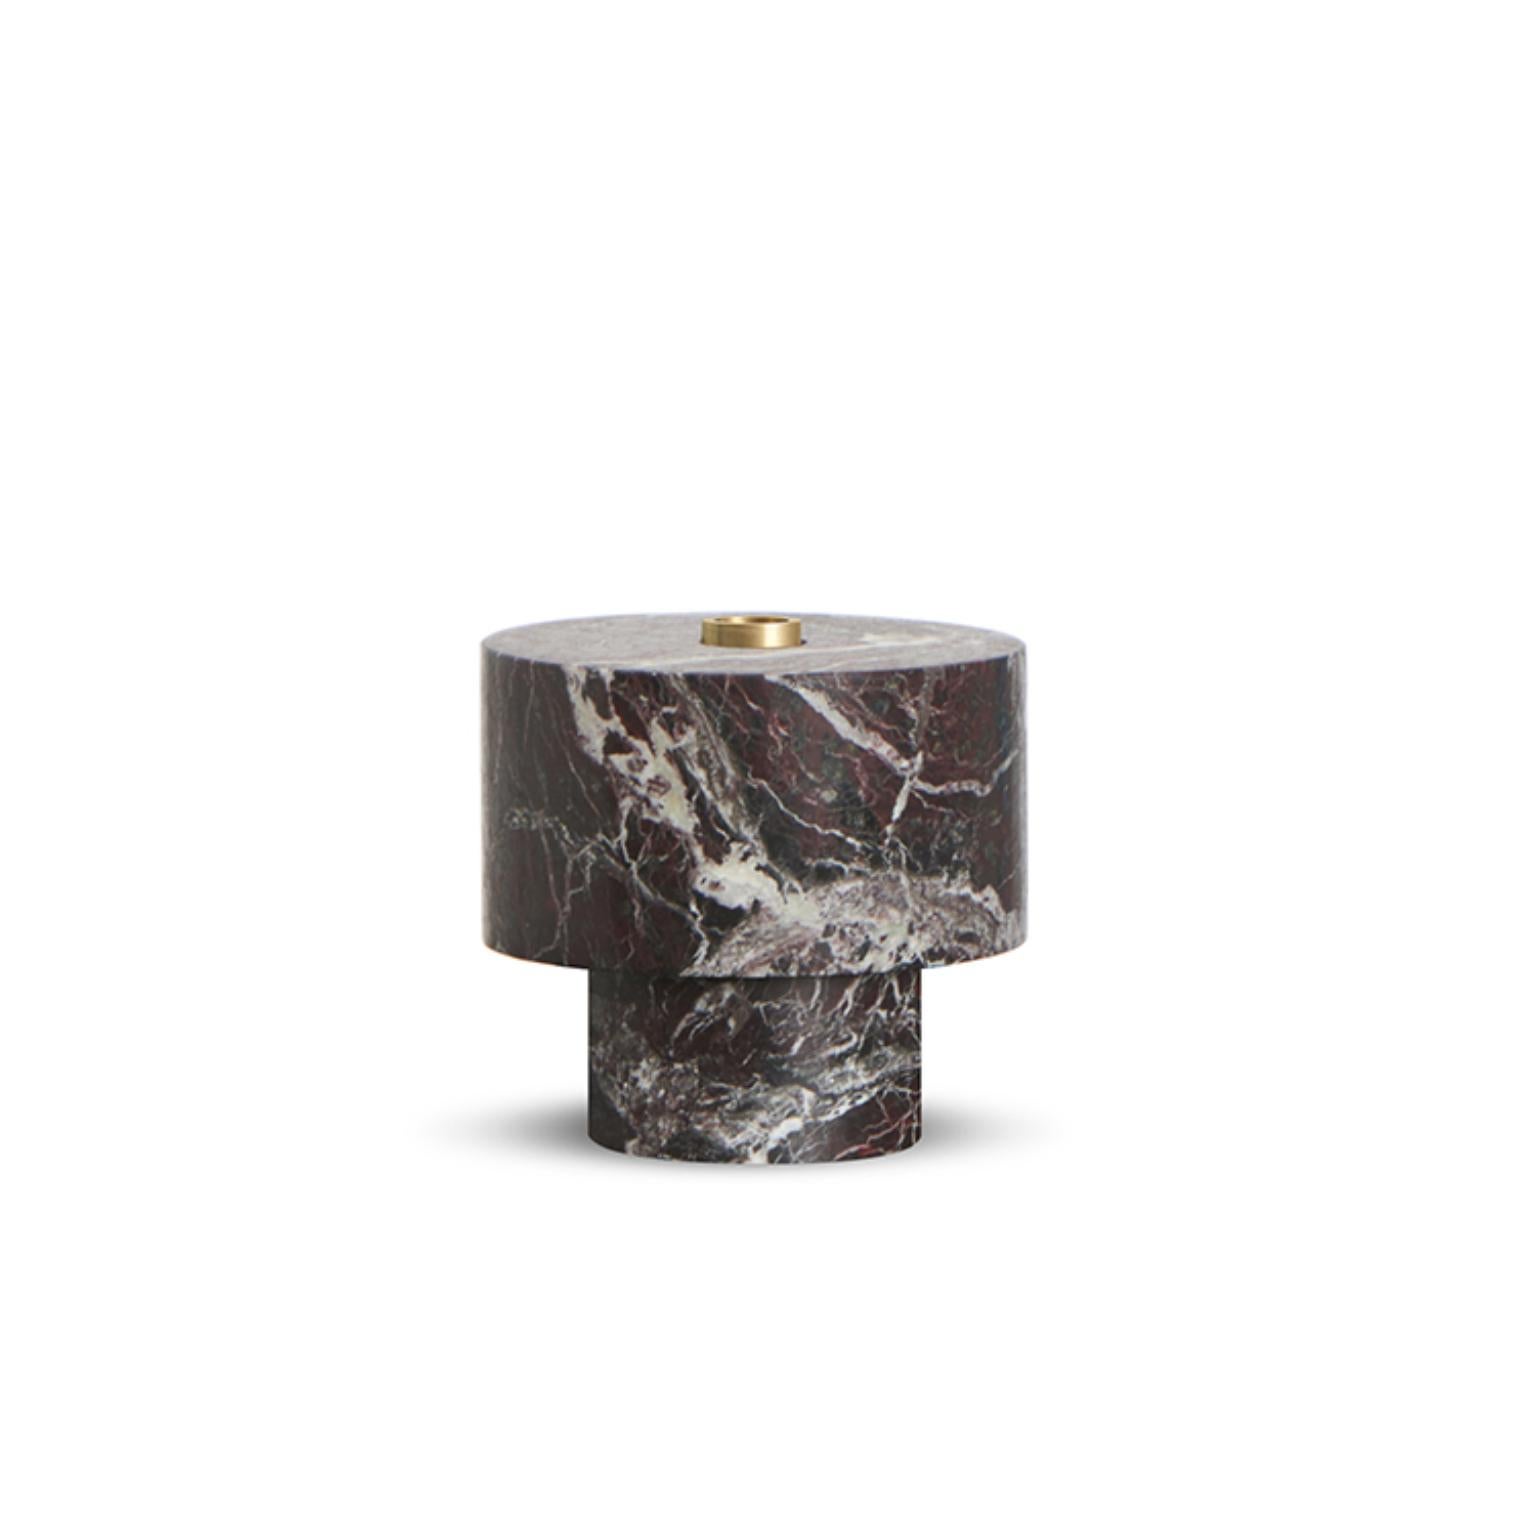 Rosso Levanto candleholder by Karen Chekerdjian
Dimensions: W 8 x D 8 x H 24
Materials: Rosso Levanto marble

Karen’s trajectory into designing was unsystematic, comprised of a combination of practical experience in various creative fields and